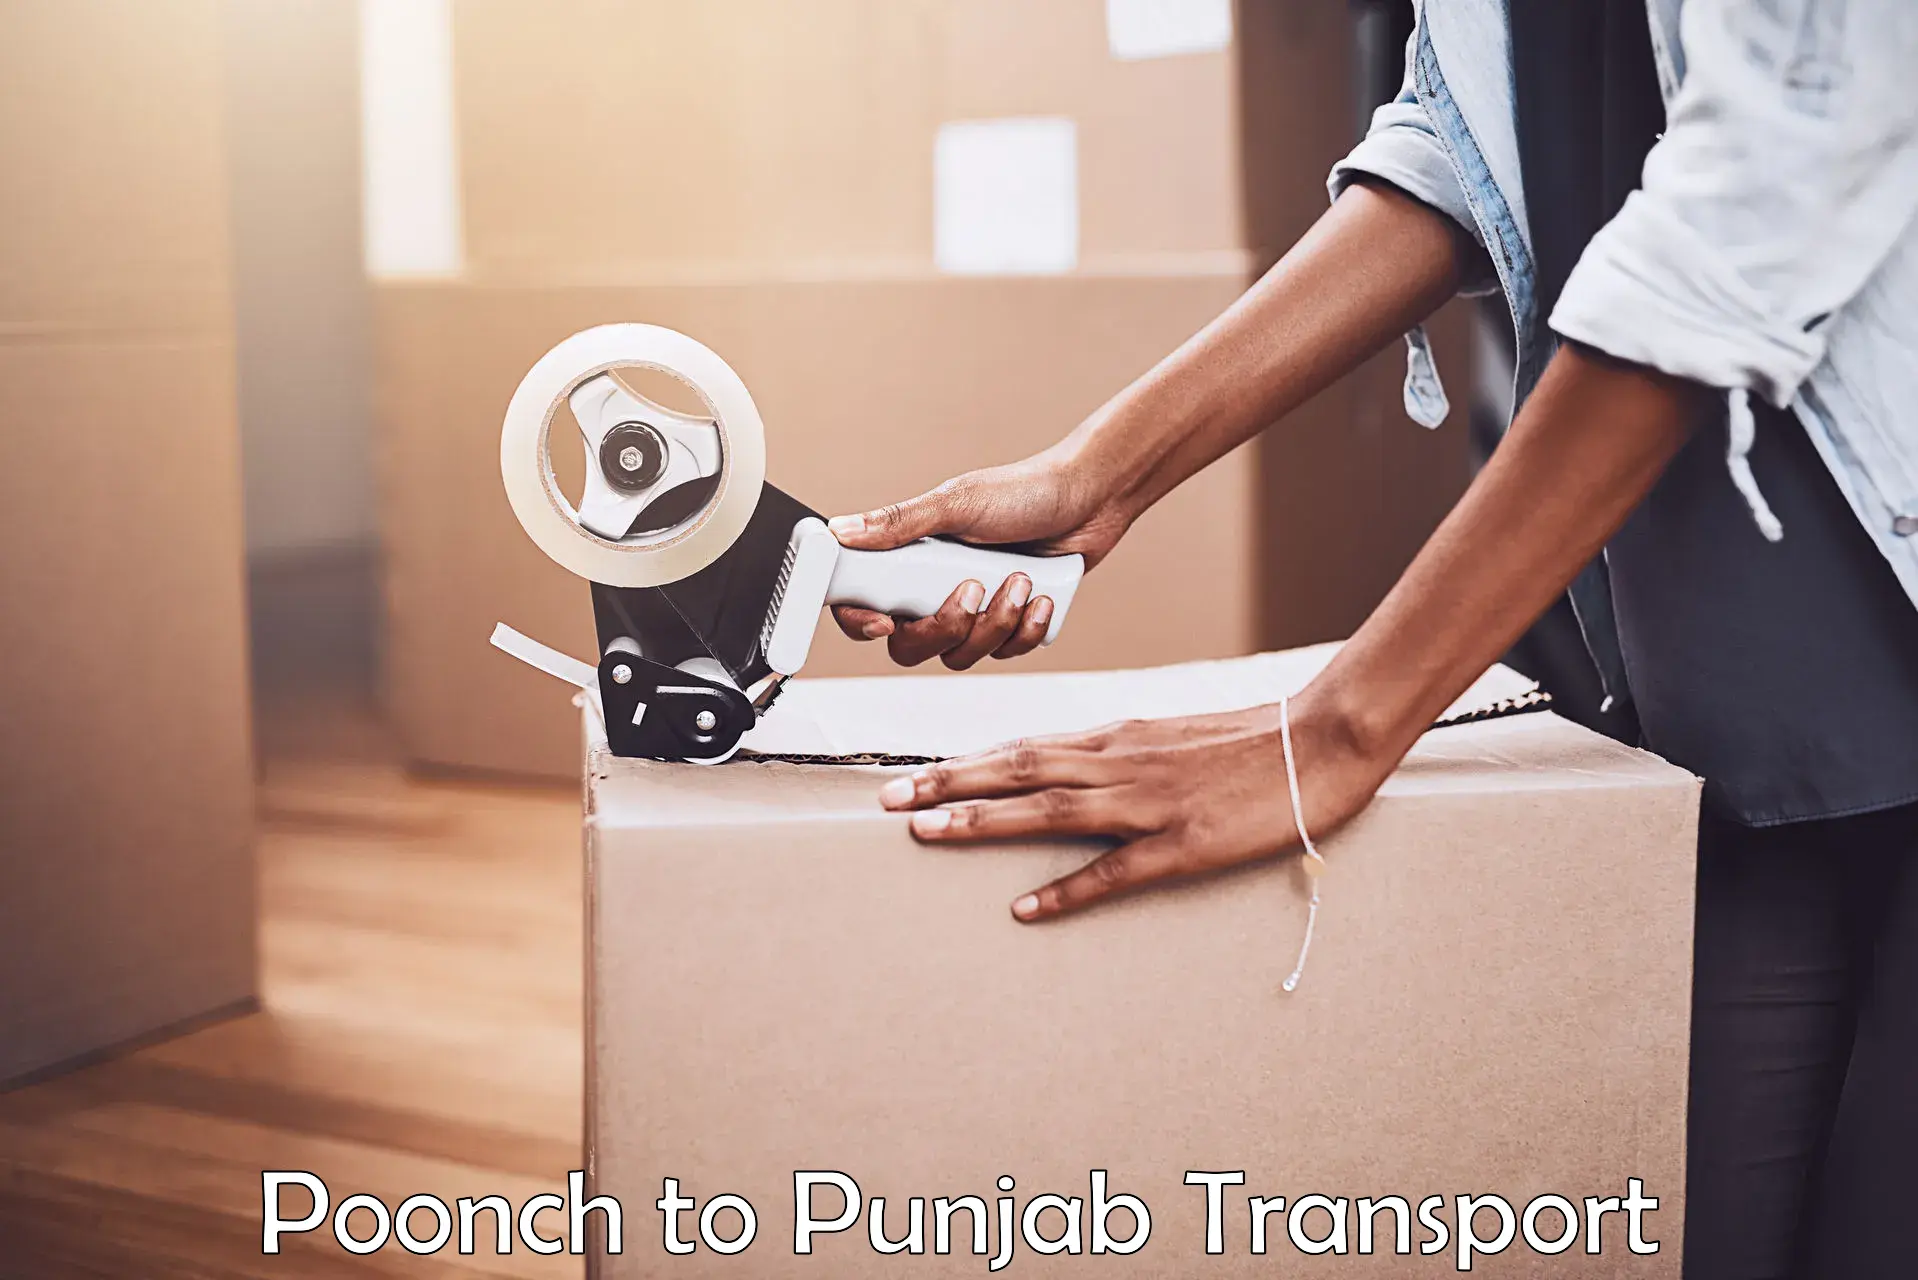 Goods delivery service Poonch to Zirakpur